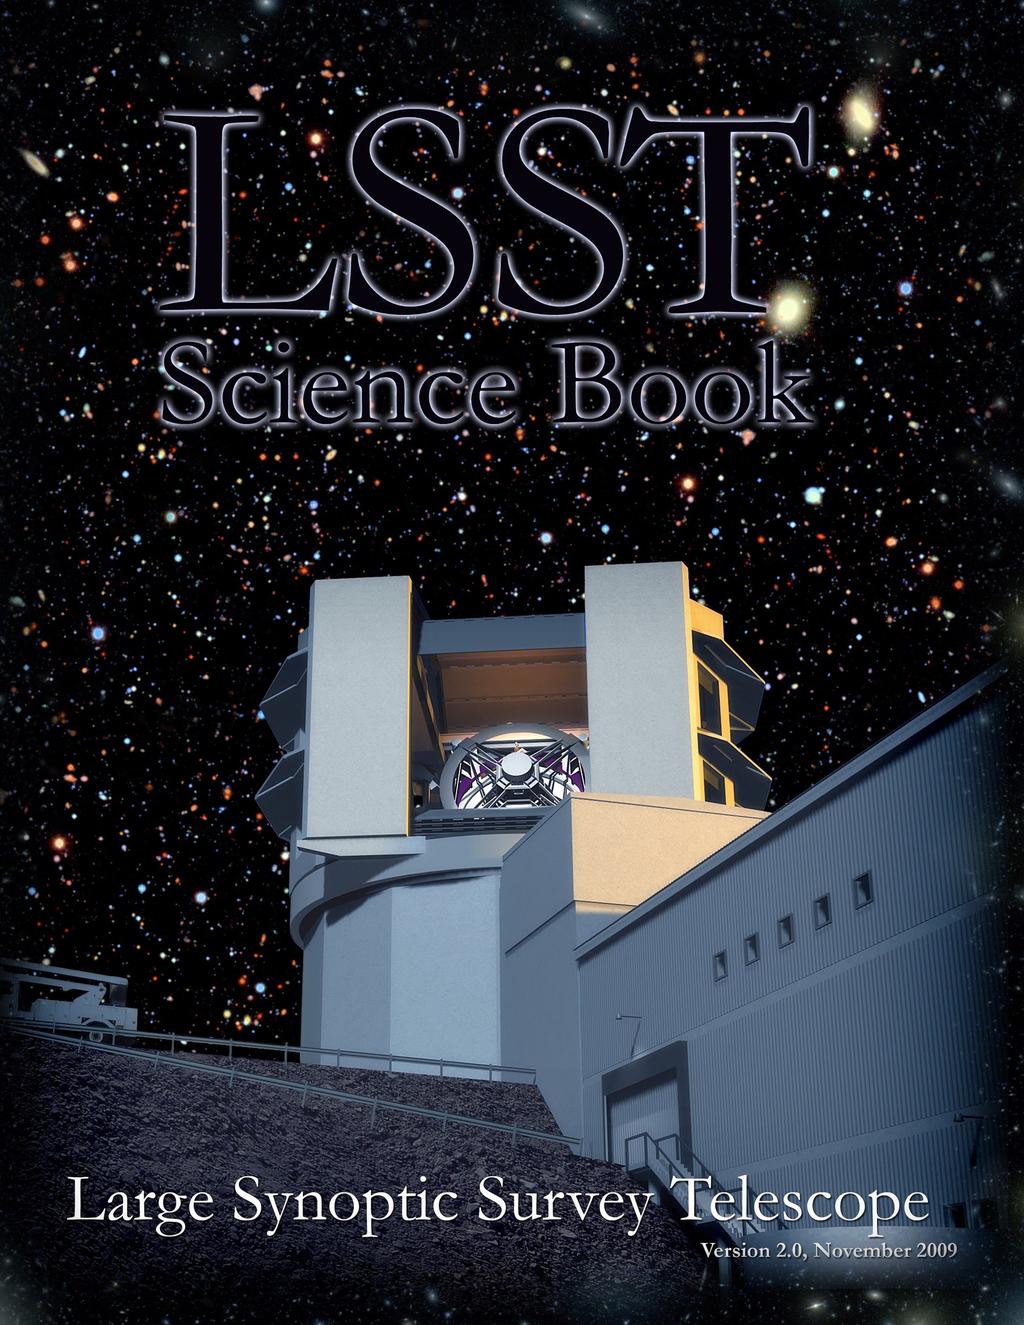 LSST Science Themes Dark matter, dark energy, cosmology (spatial distribution of galaxies, gravitational lensing, supernovae, quasars) Time domain (cosmic explosions, variable stars) The Solar System